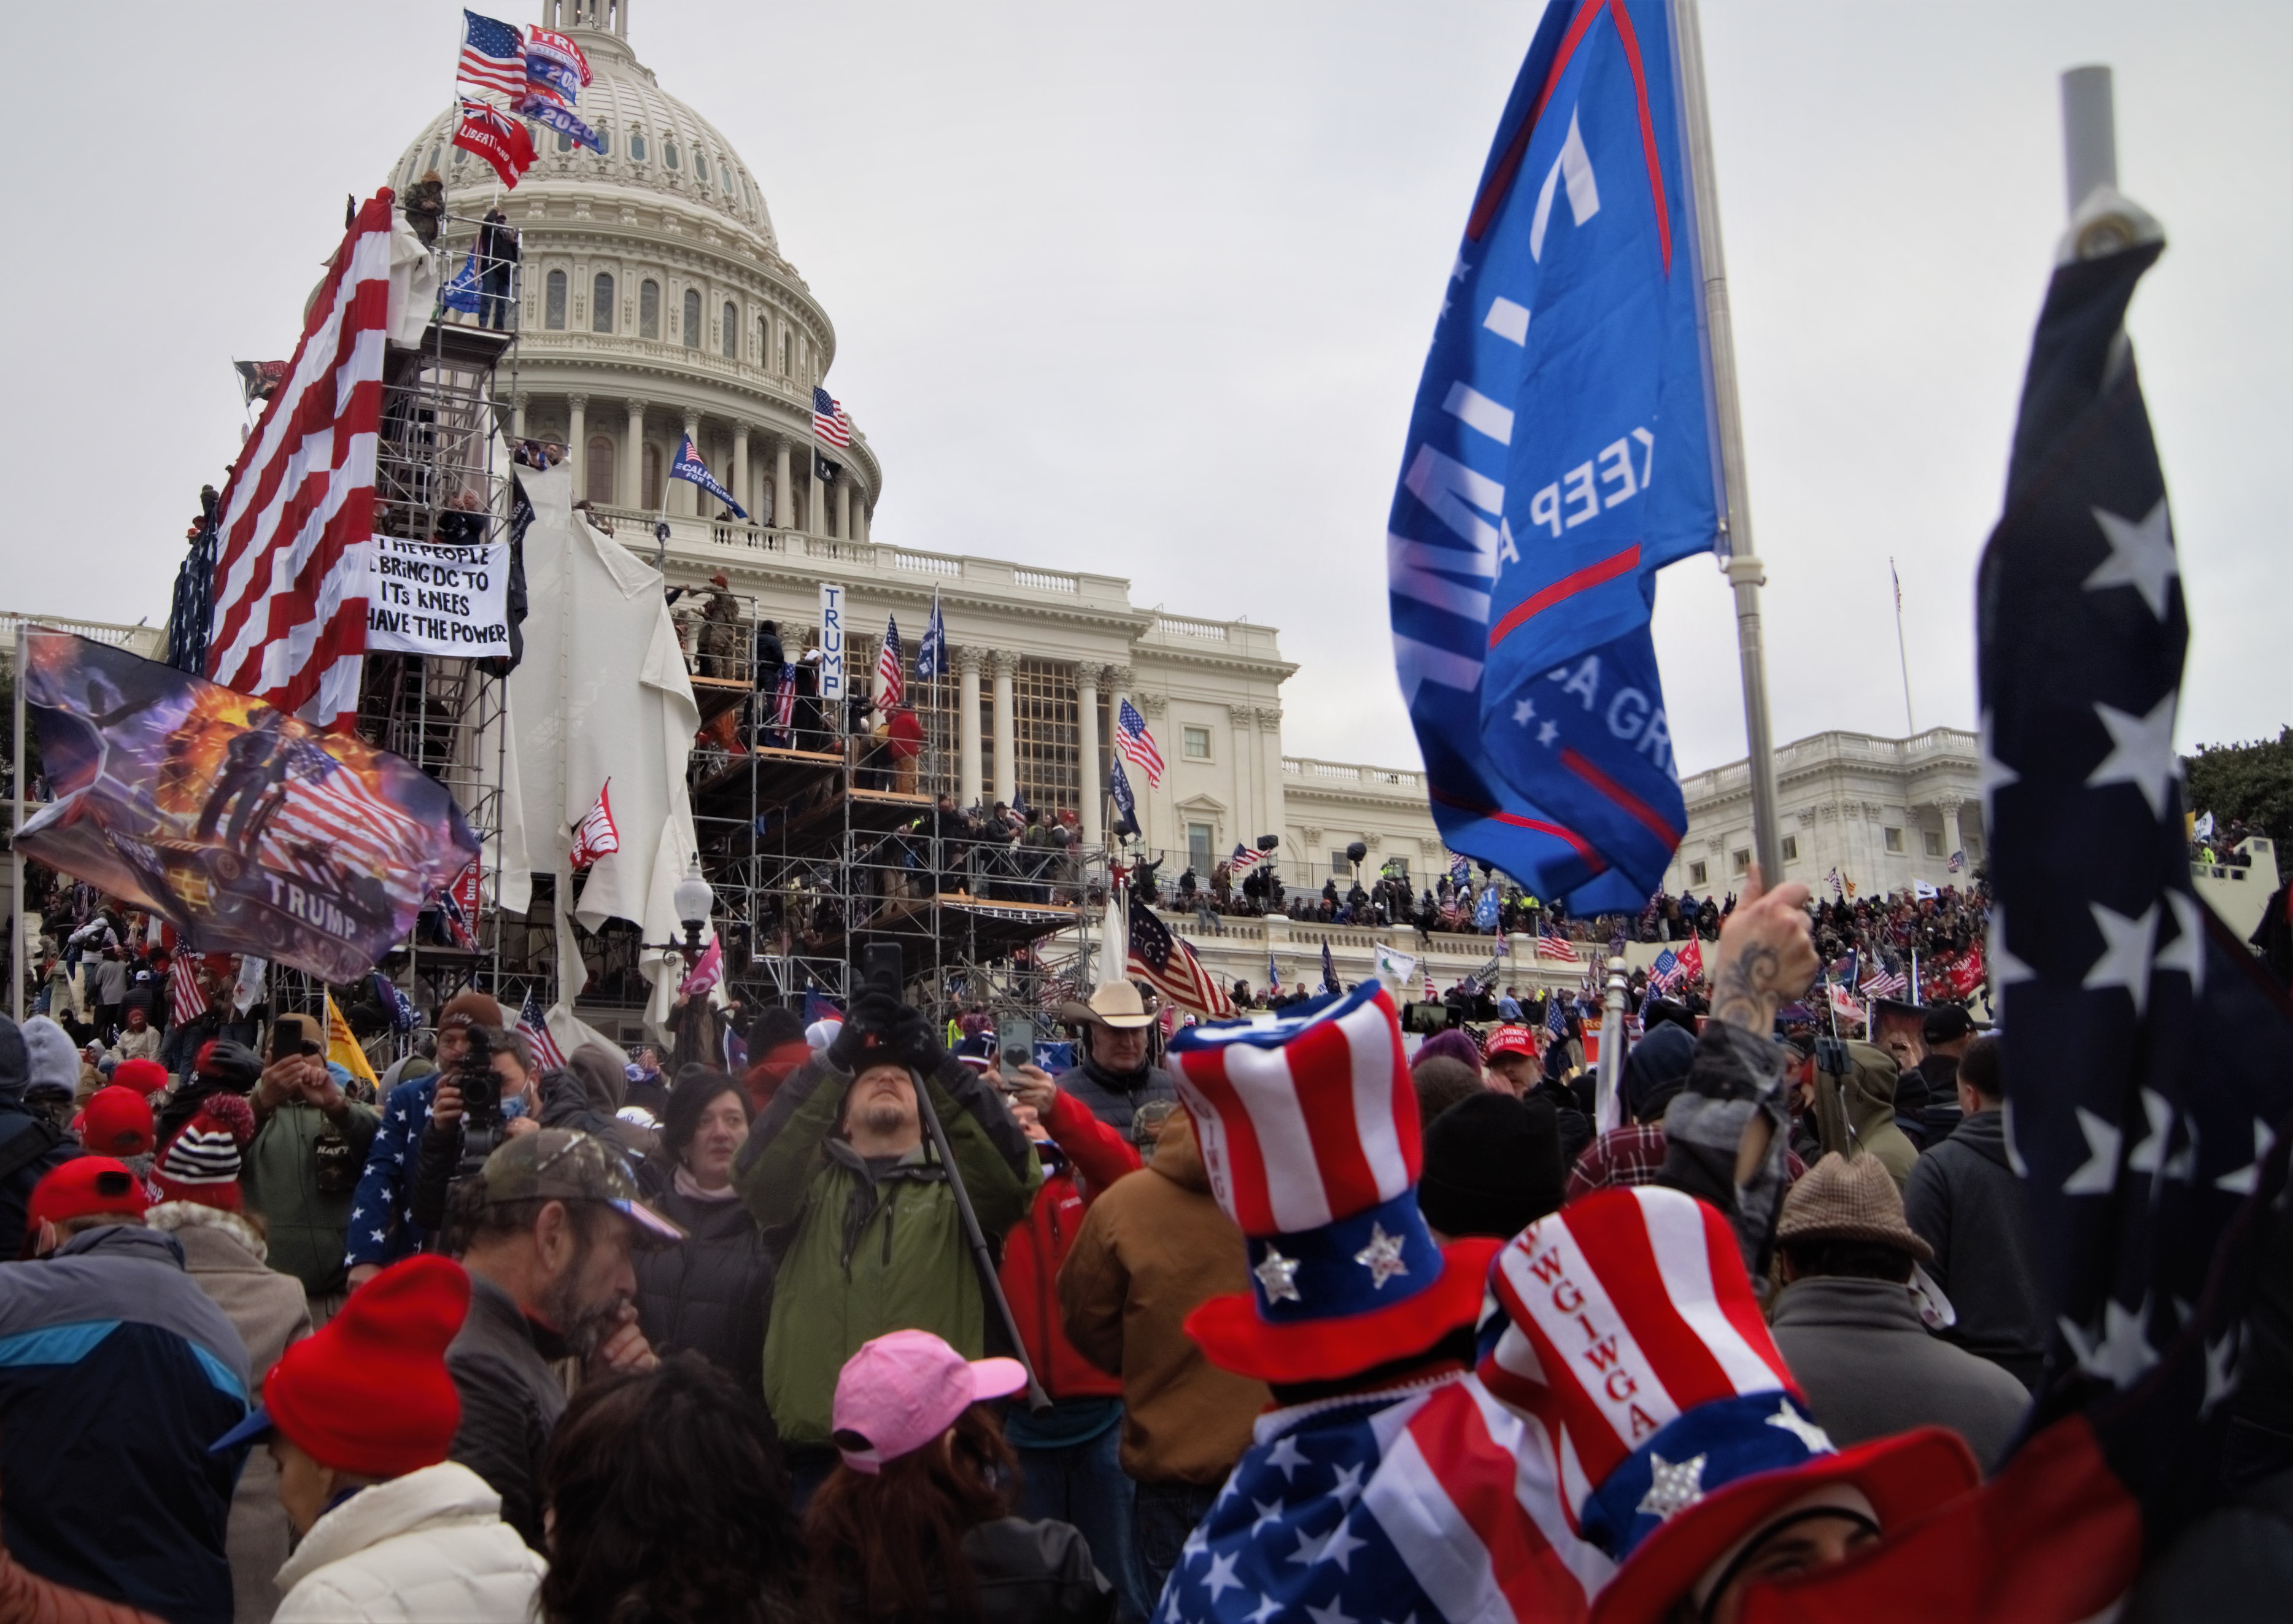 Outside during the US Capitol during the January 6, 2021 attack on the building